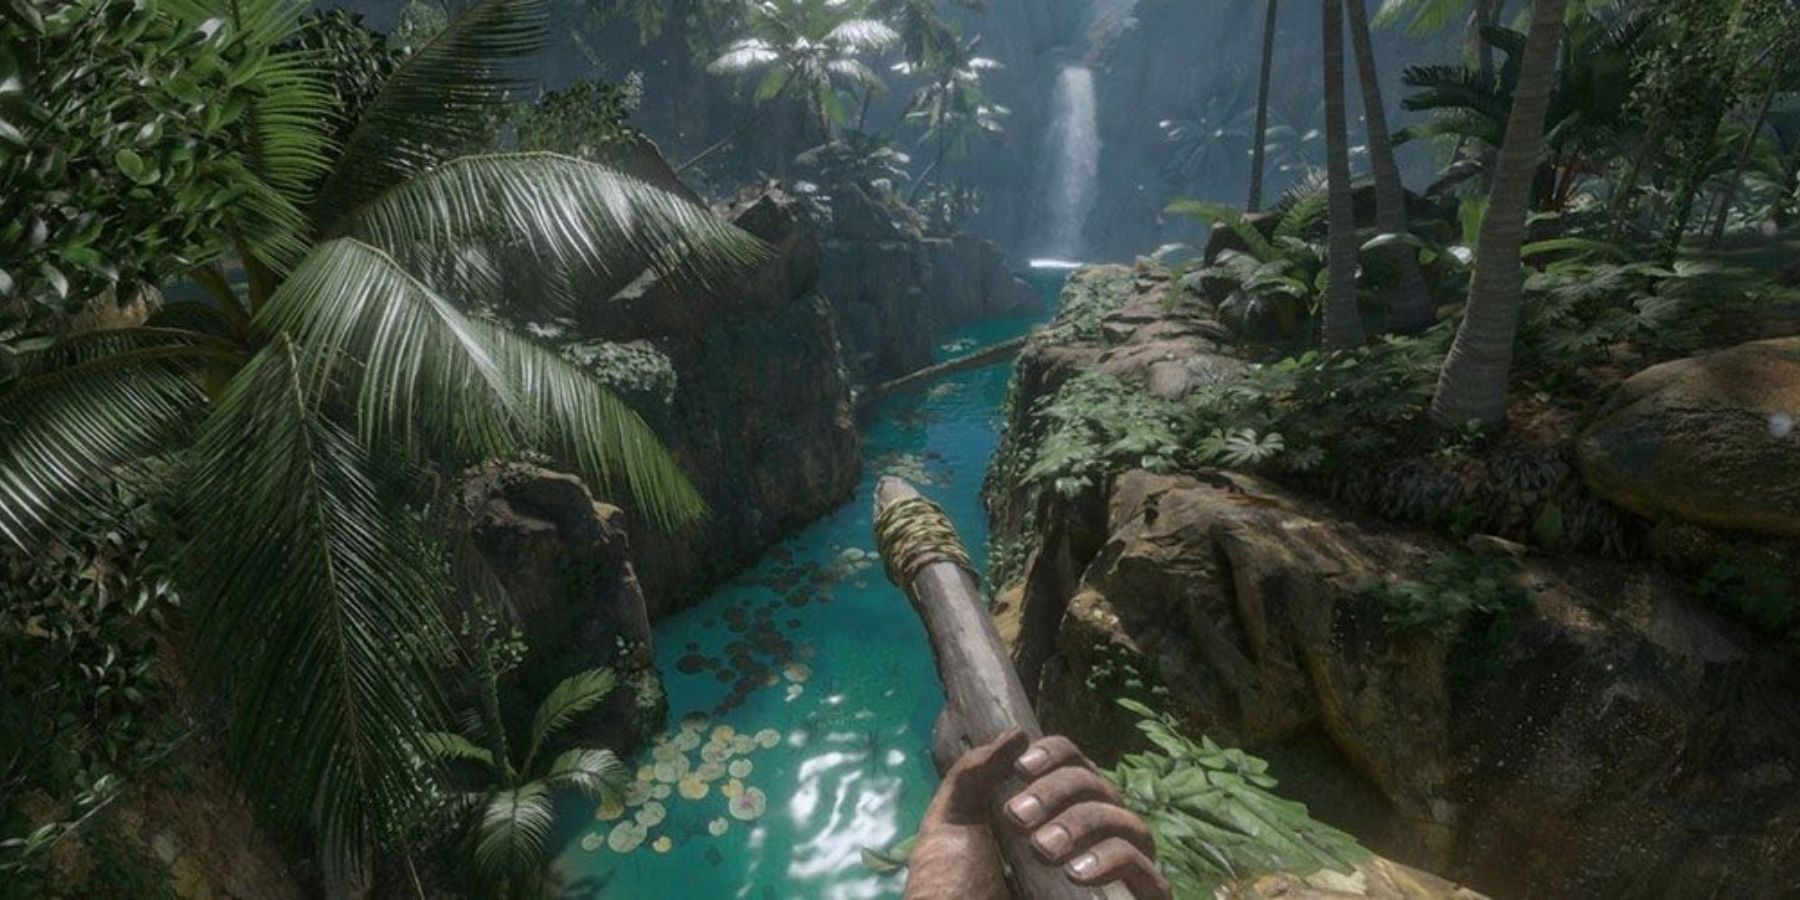 A spear-wielding character stands by the banks of Green Hell's bright blue river and the surrounding foliage.